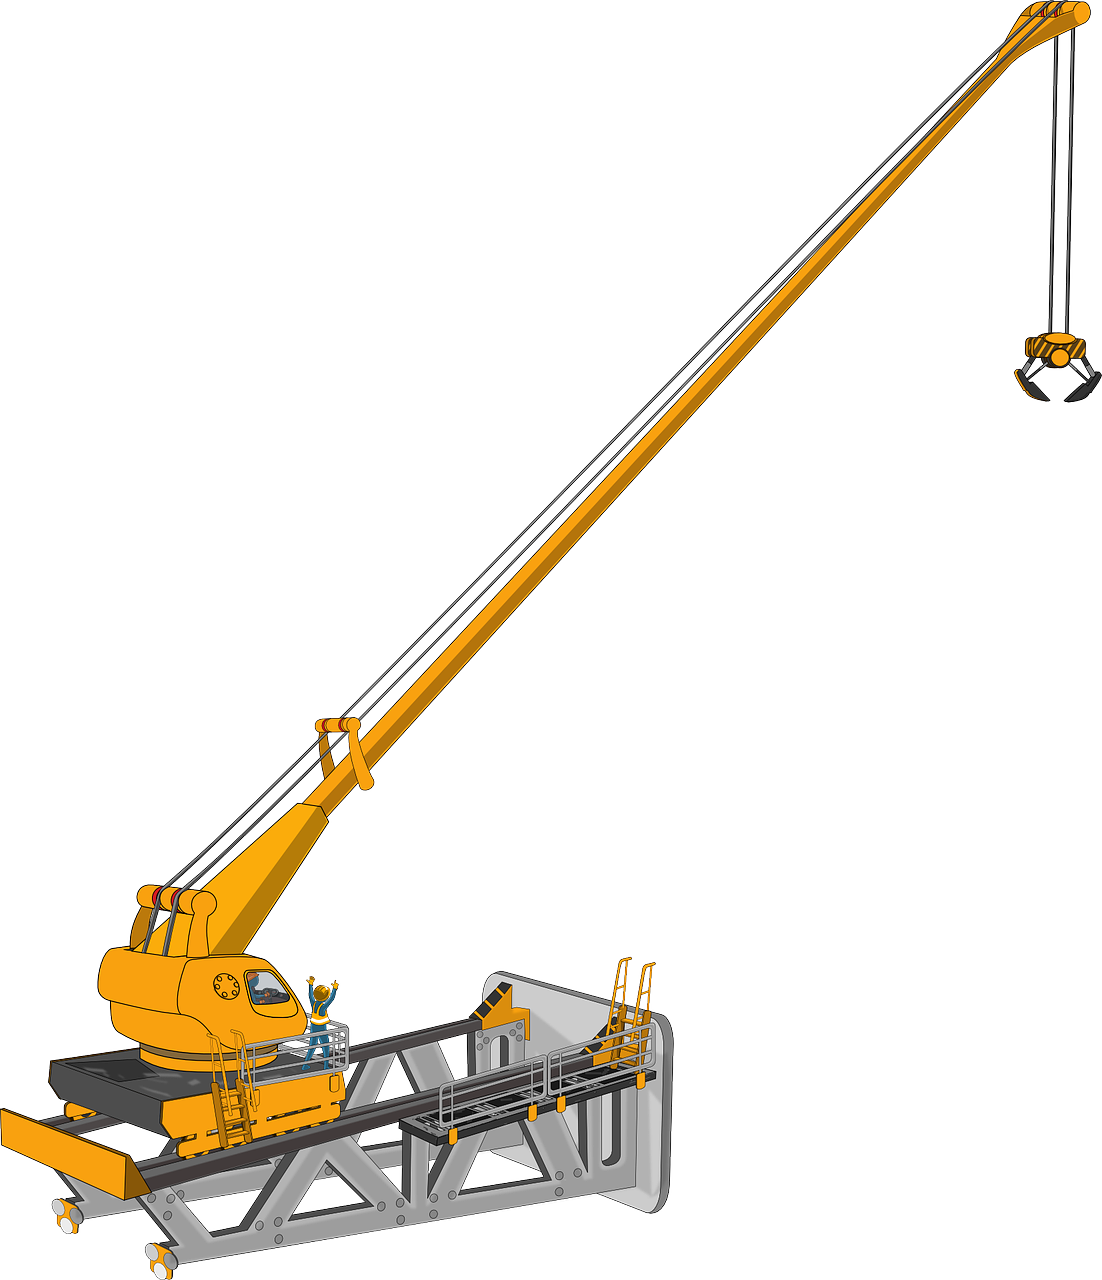 Clamshell , Heavy Equipment Used in Construction